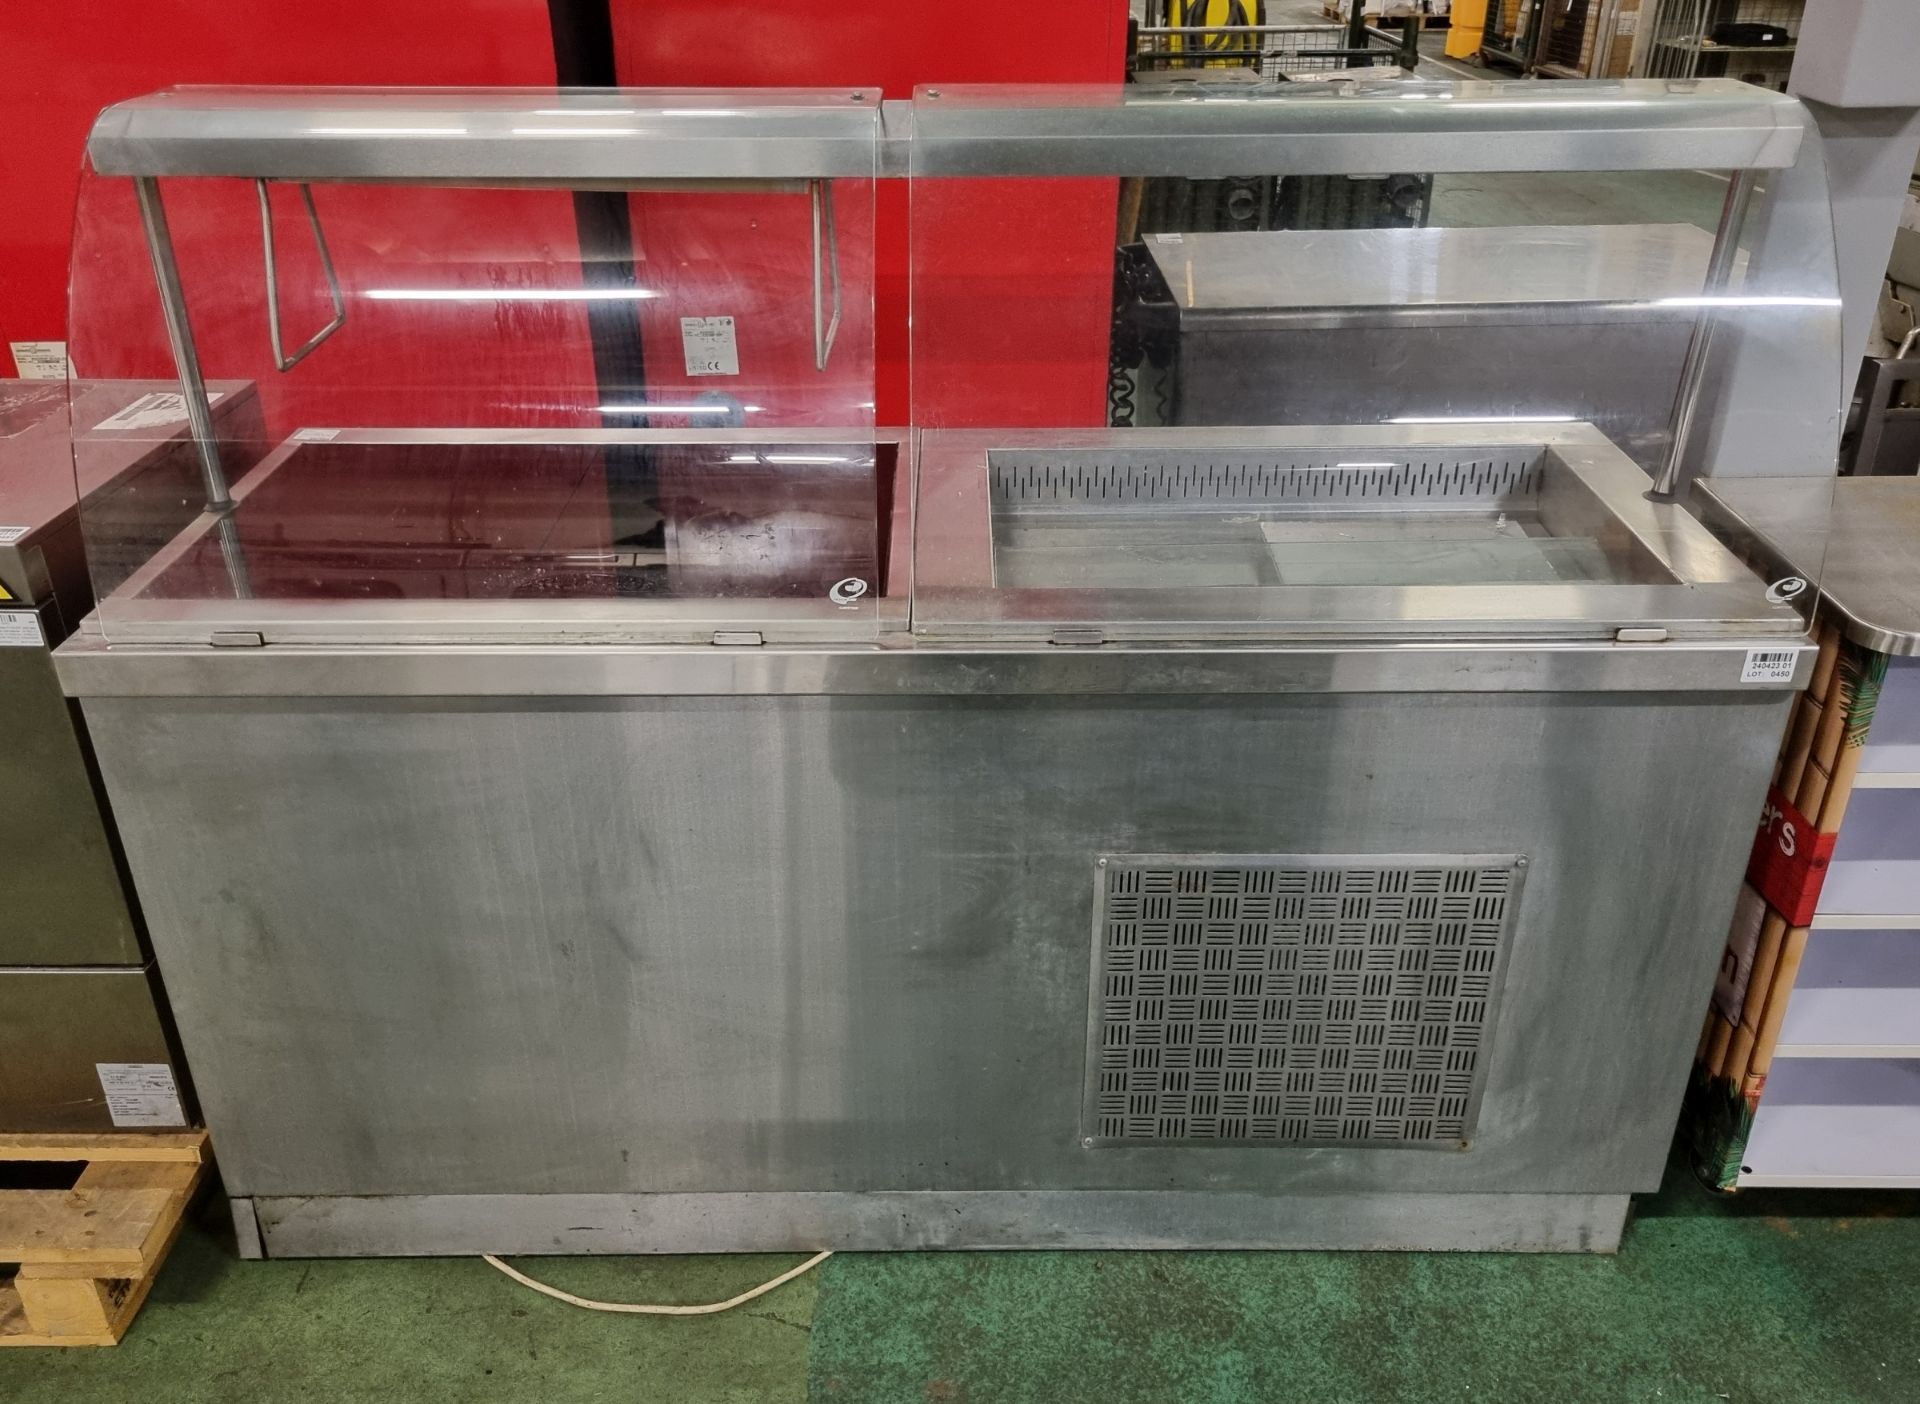 Stainless steel unit with bain marie & hot plate section - W 1800 x D 700 x H 1370mm